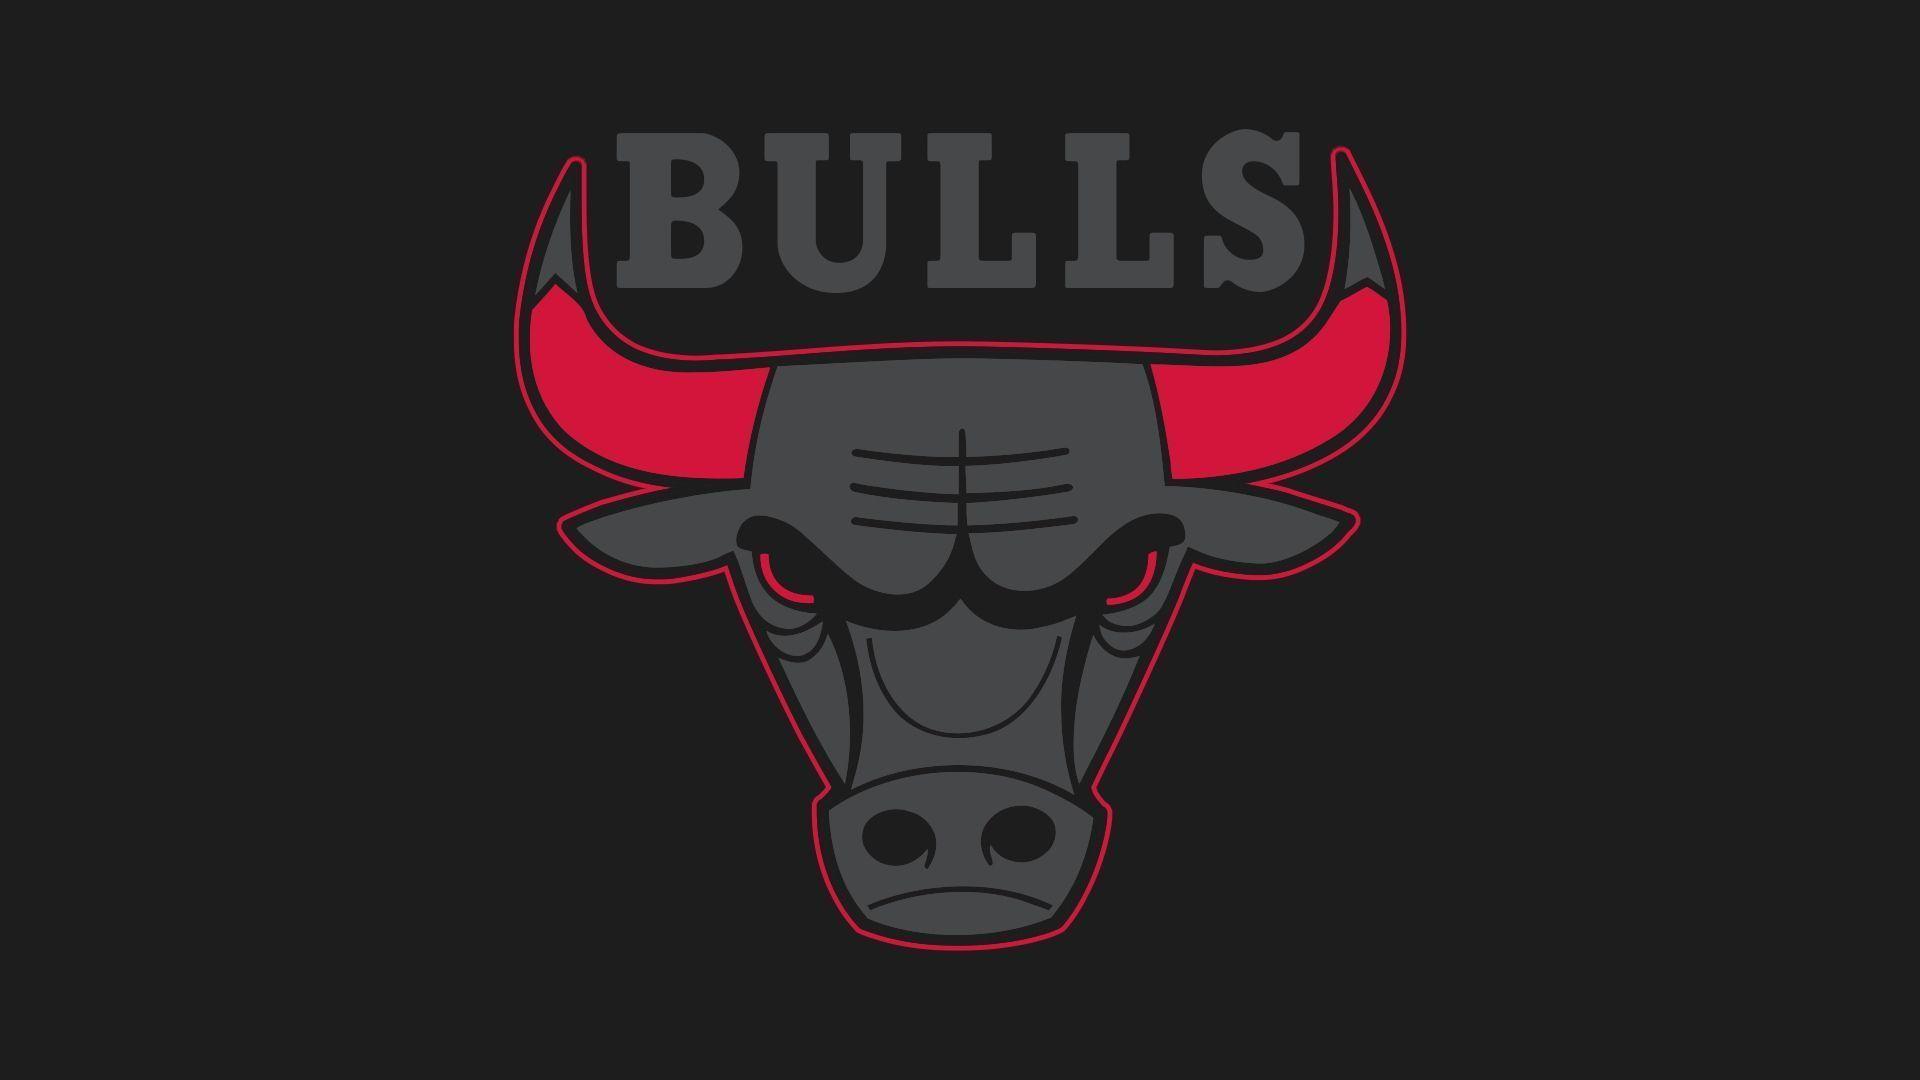 Chicago Bulls Wallpaper High Definition zD. Awesomeness. Chicago